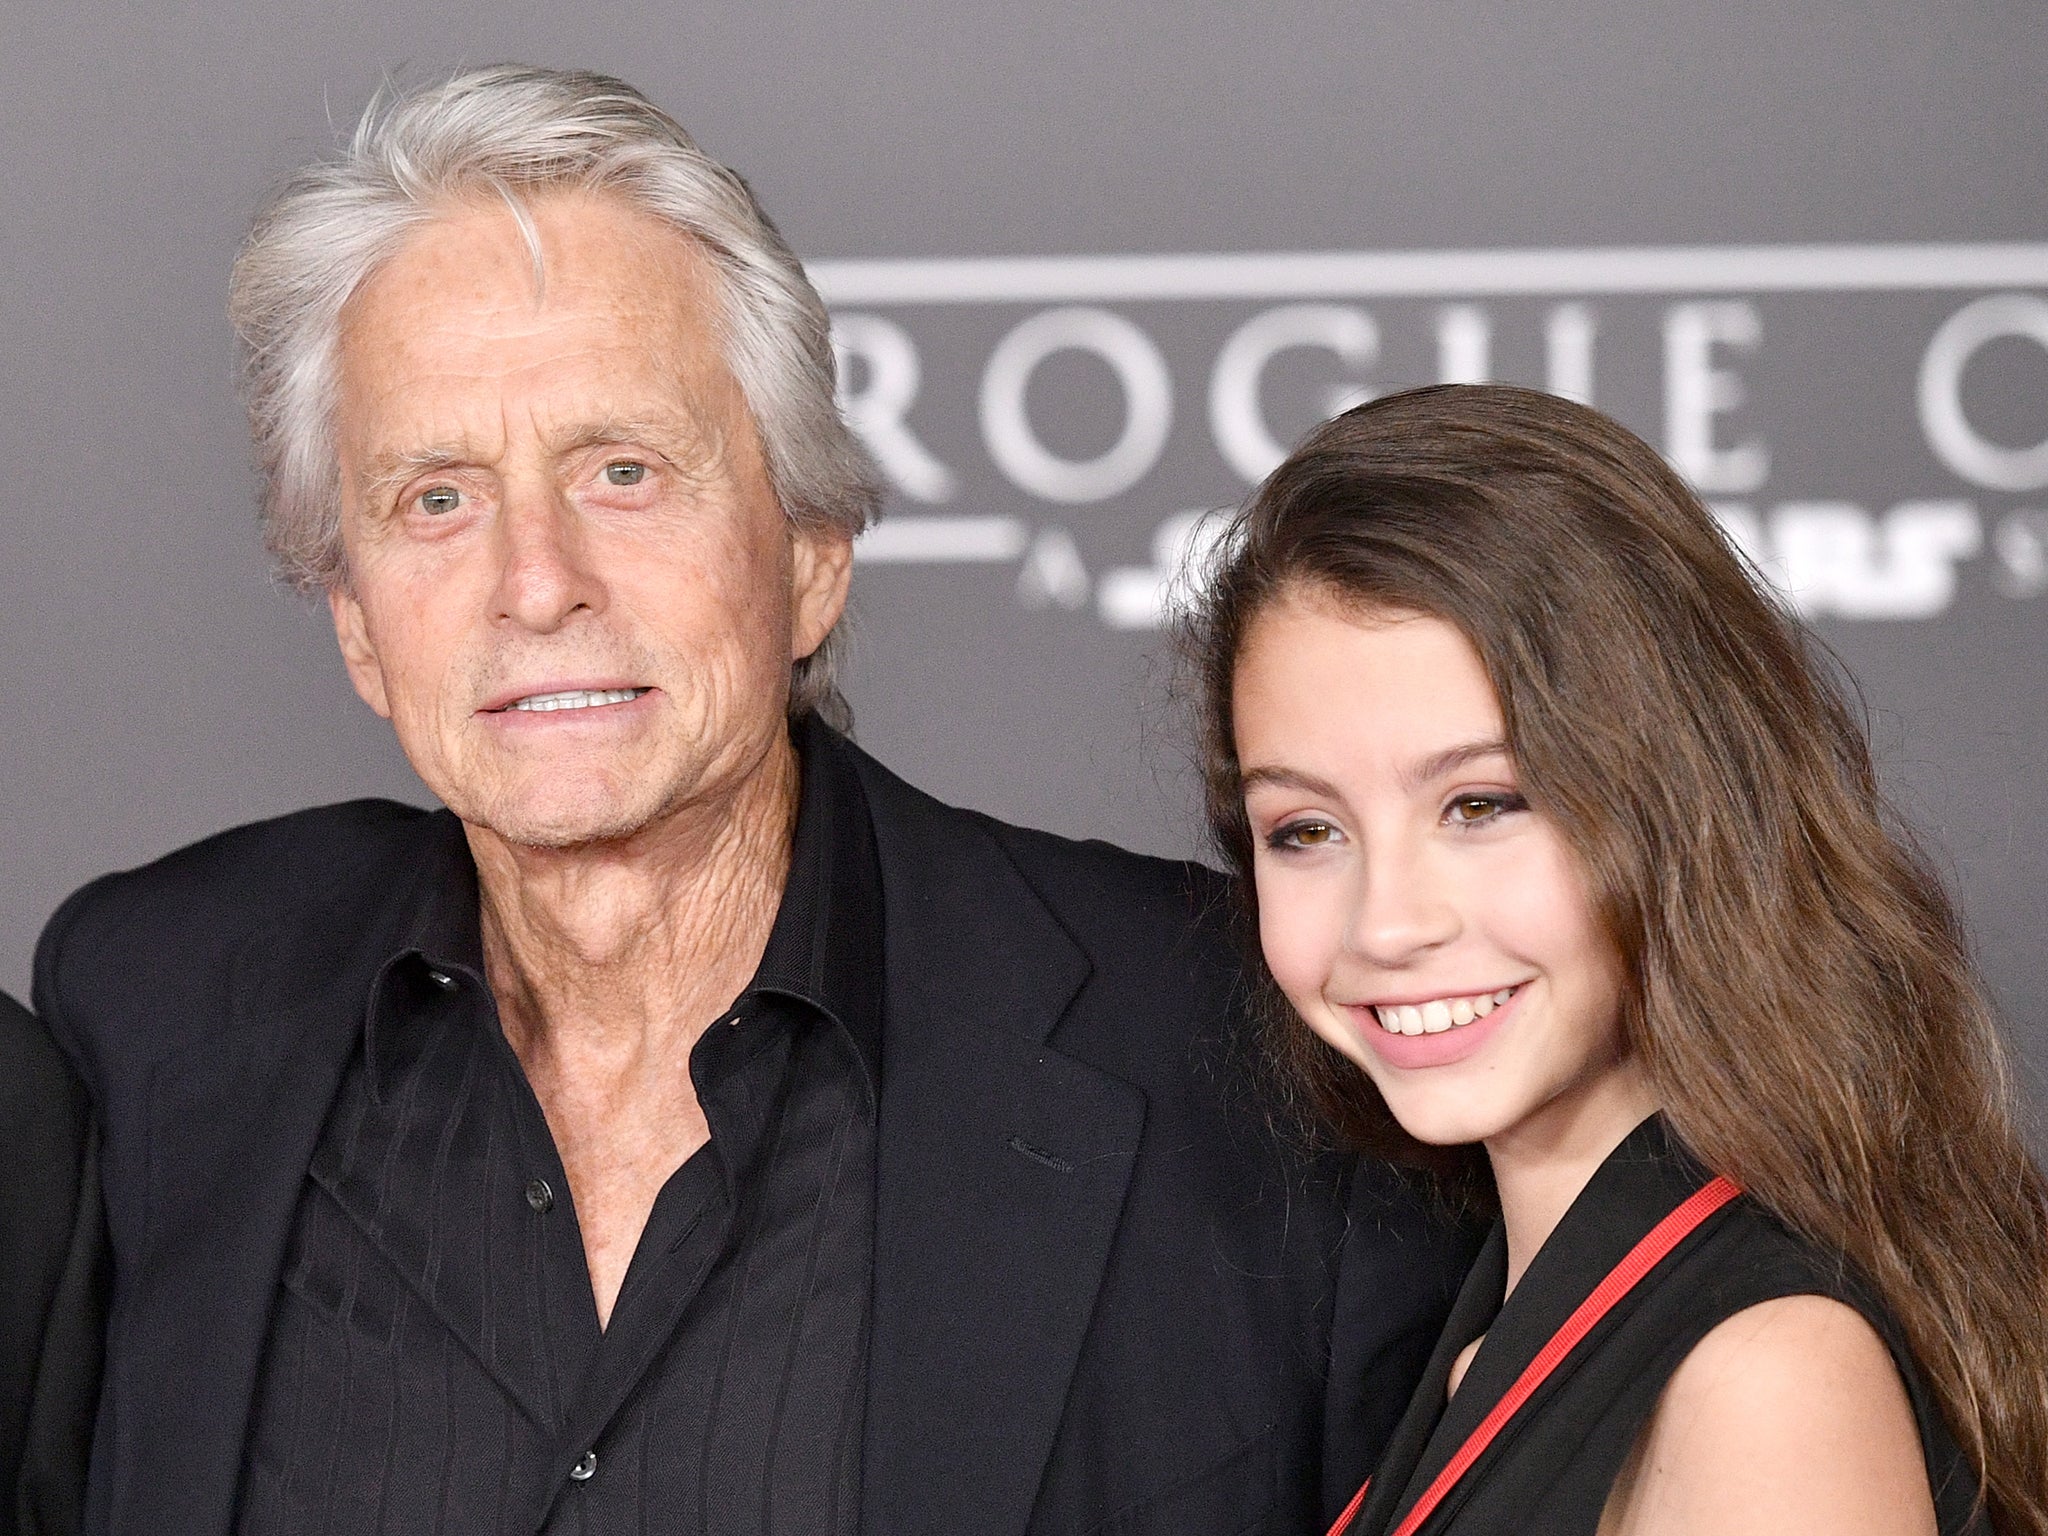 Michael Douglas, 76, was confused for 18-year-old daughters grandfather at her graduation The Independent photo